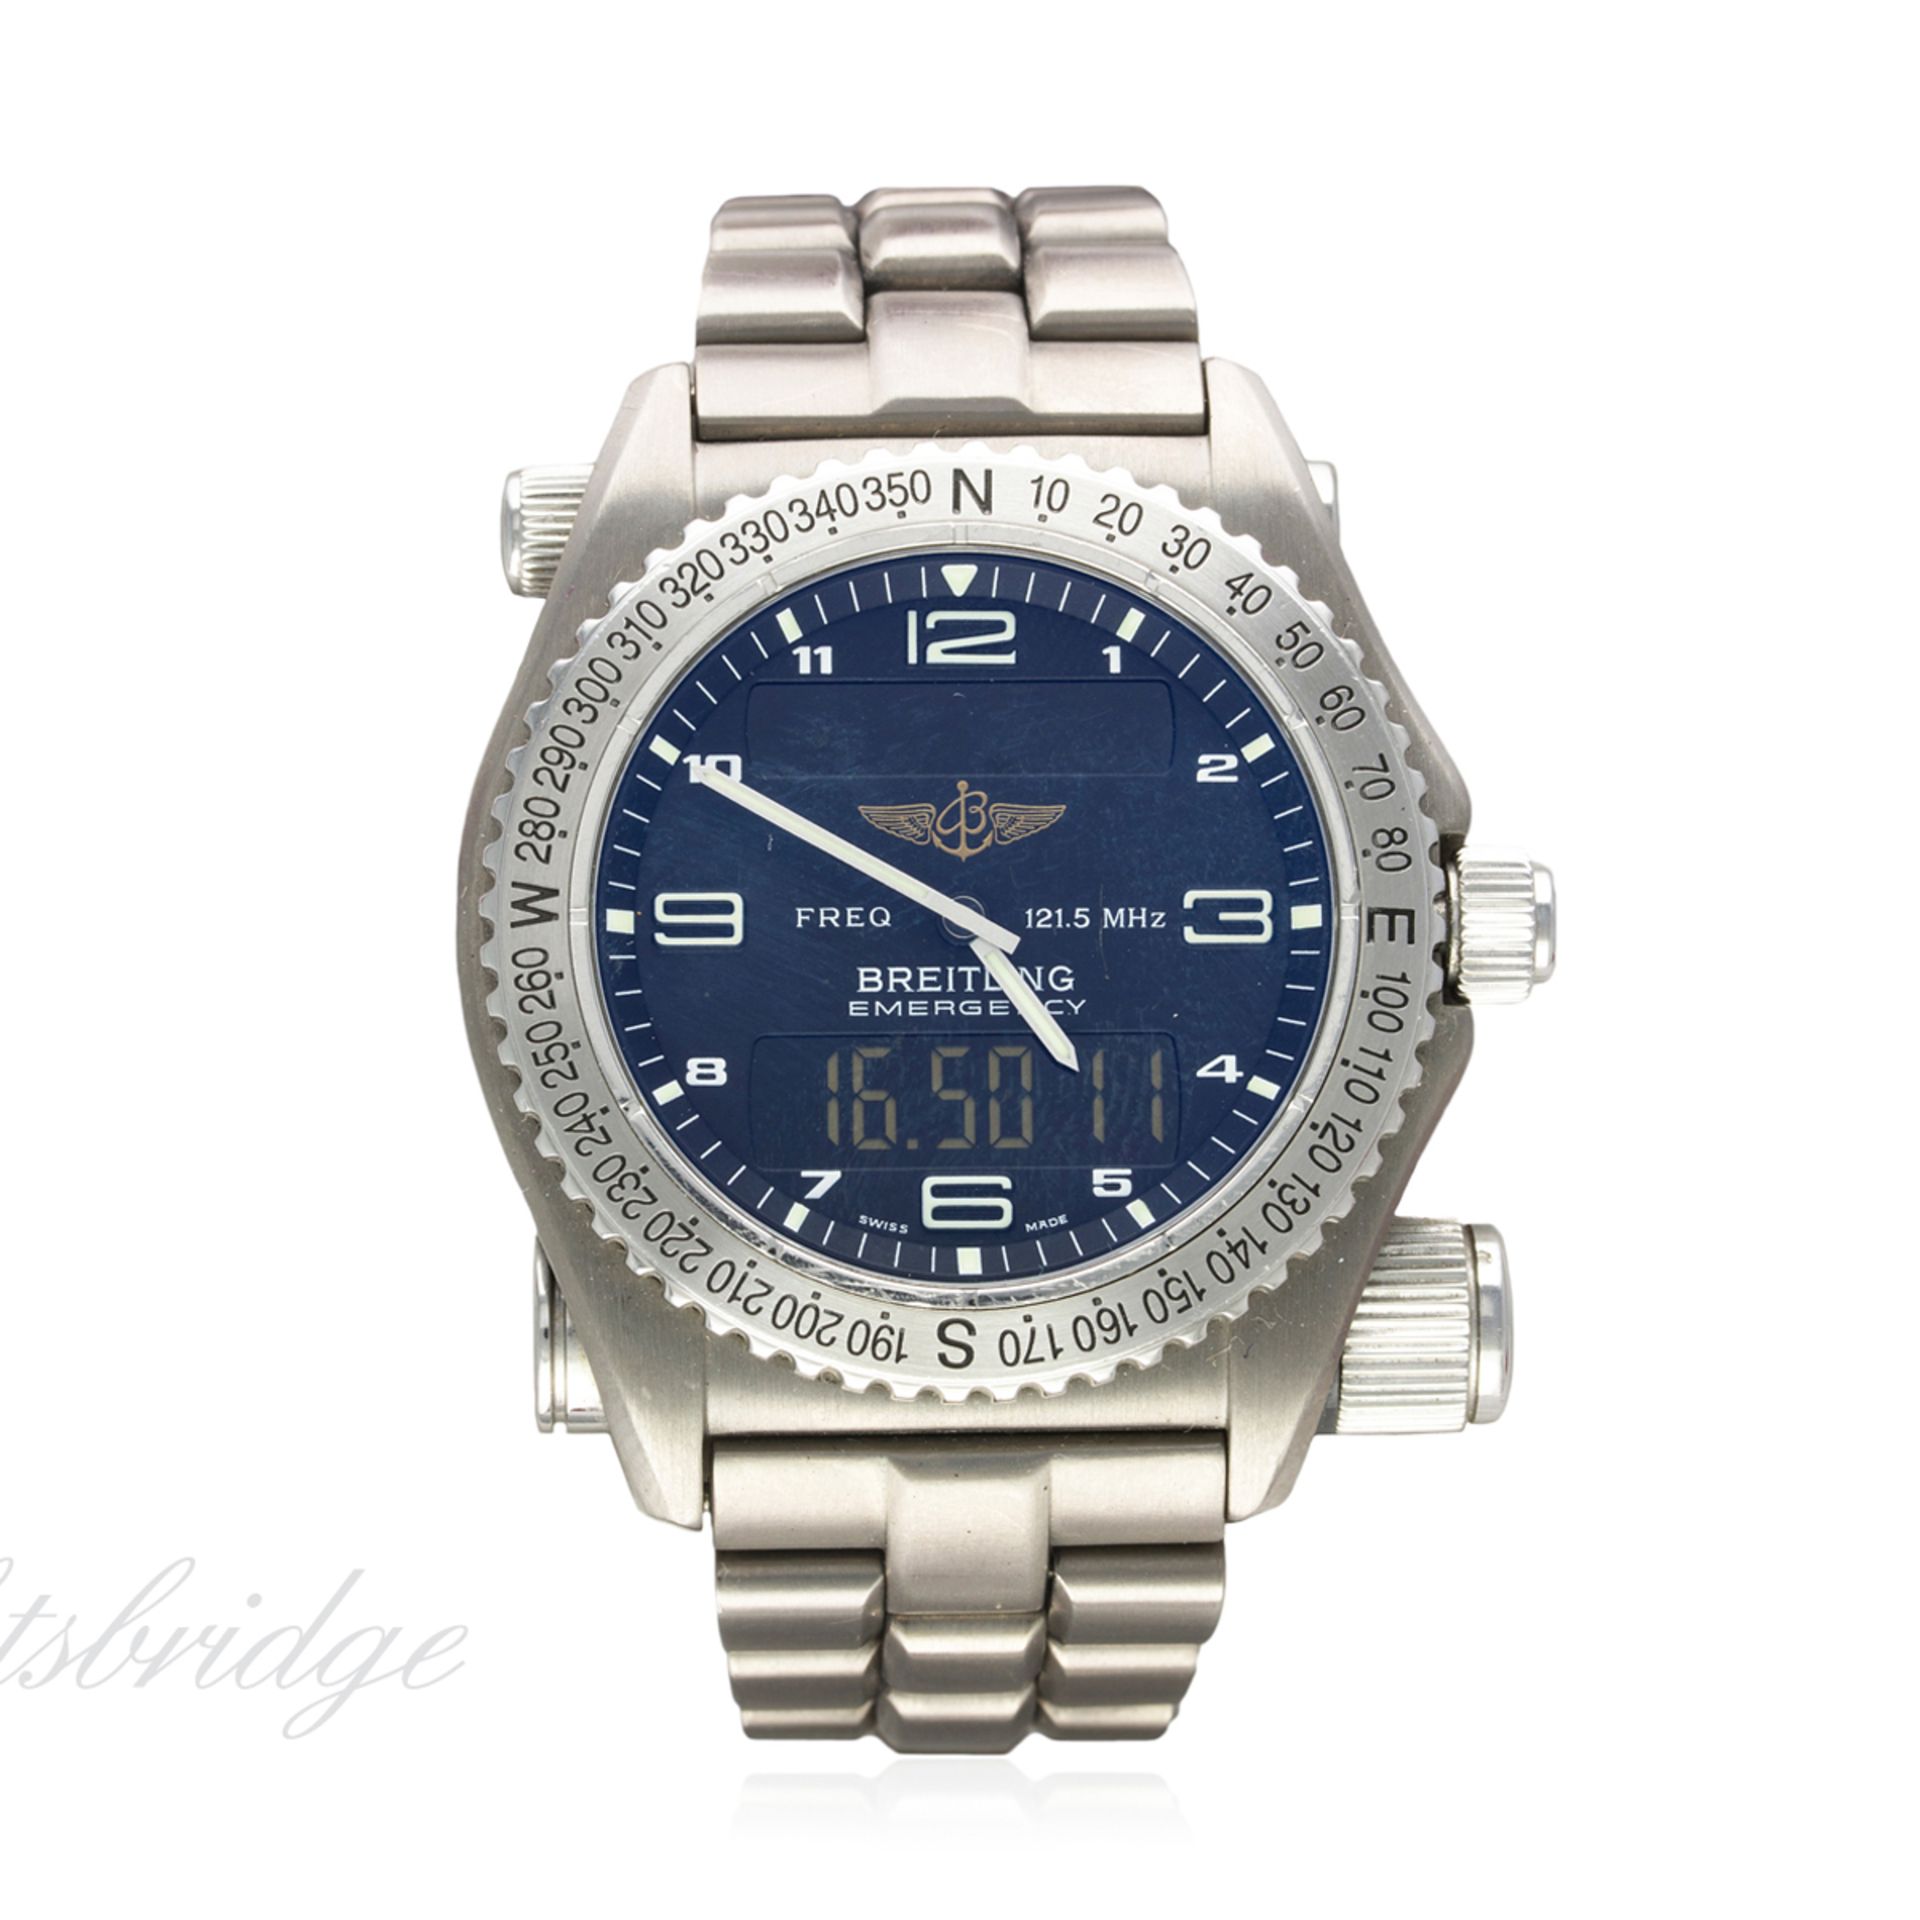 A GENTLEMAN'S TITANIUM BREITLING EMERGENCY BRACELET WATCH WITH COMPLETE BOX SET & PAPERS DATED